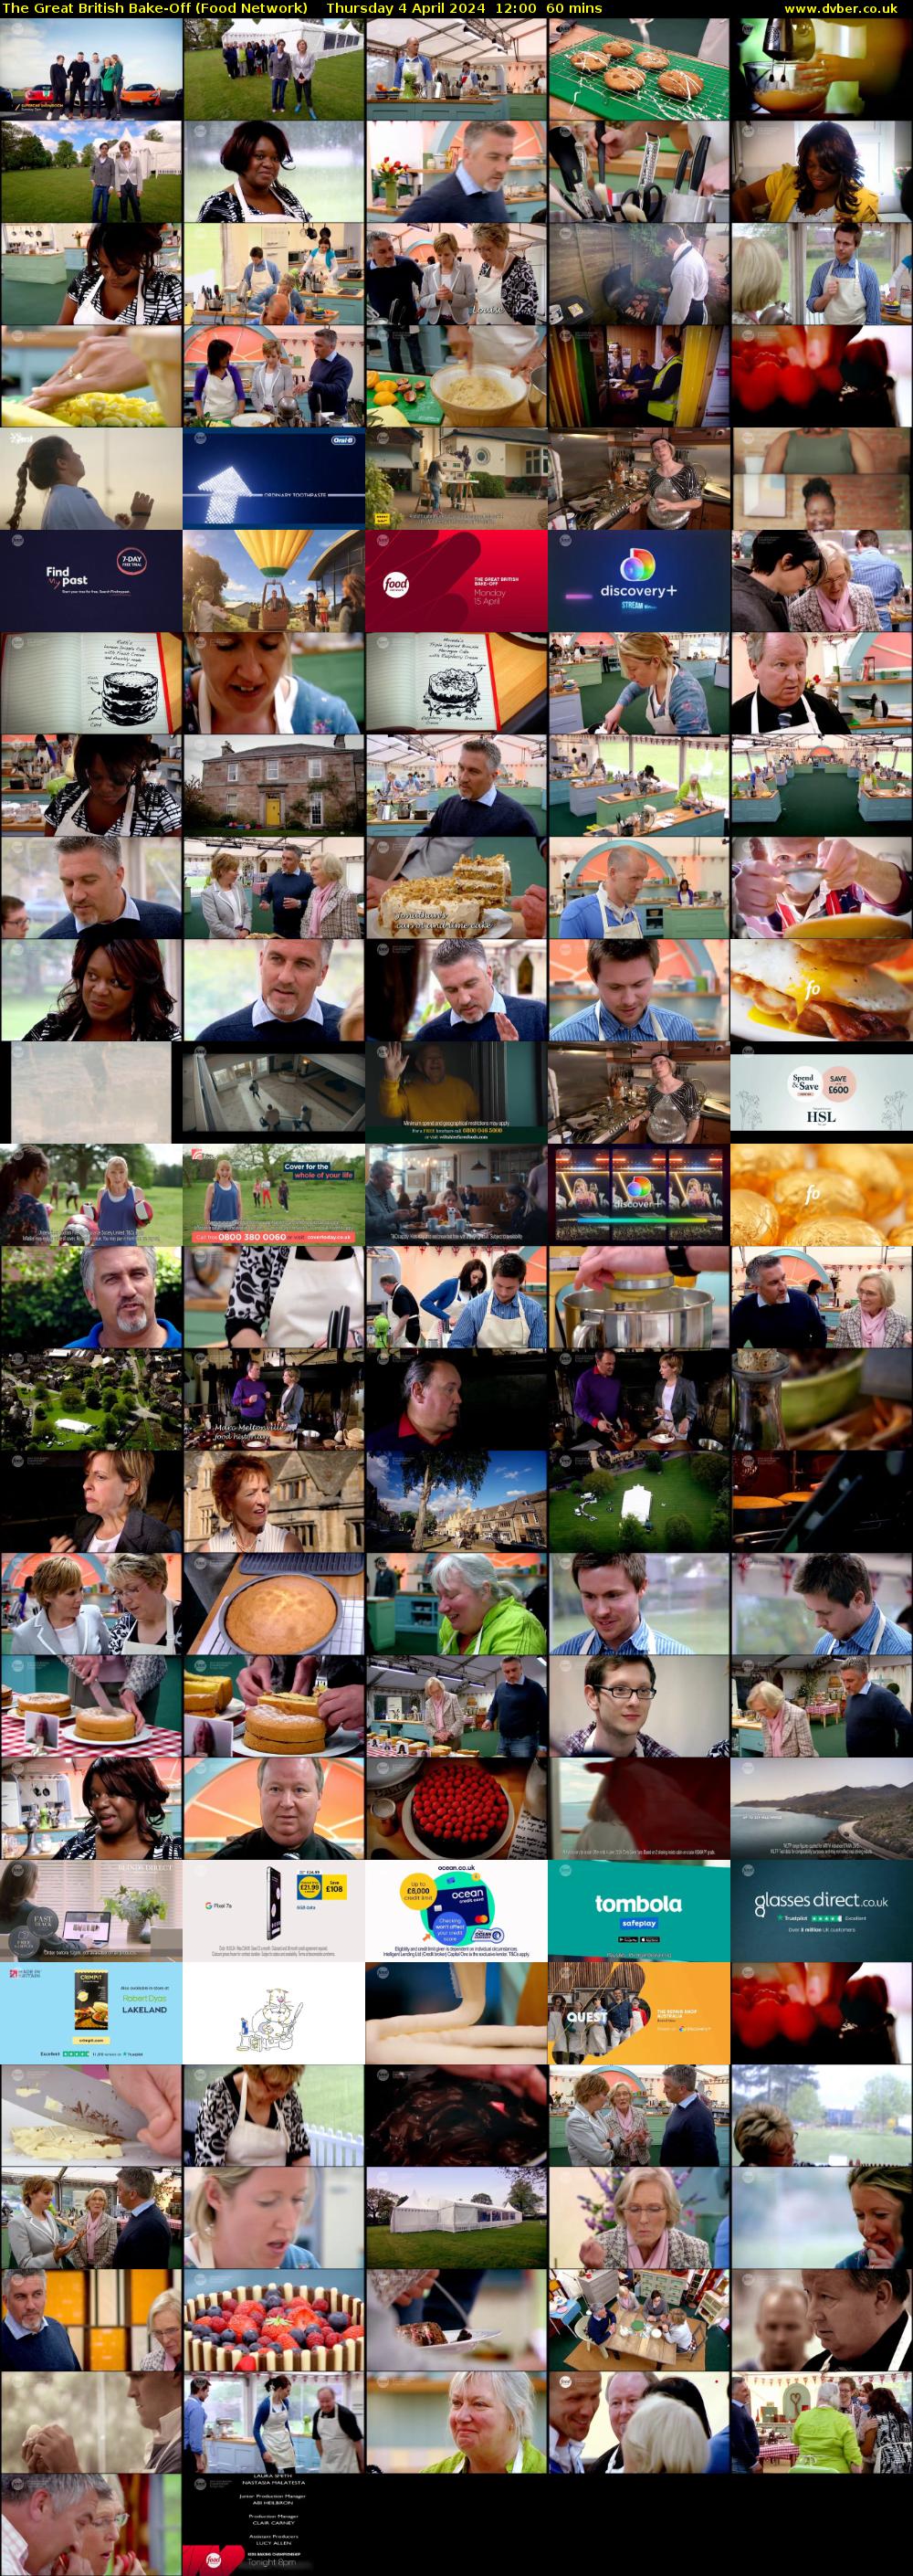 The Great British Bake-Off (Food Network) Thursday 4 April 2024 12:00 - 13:00